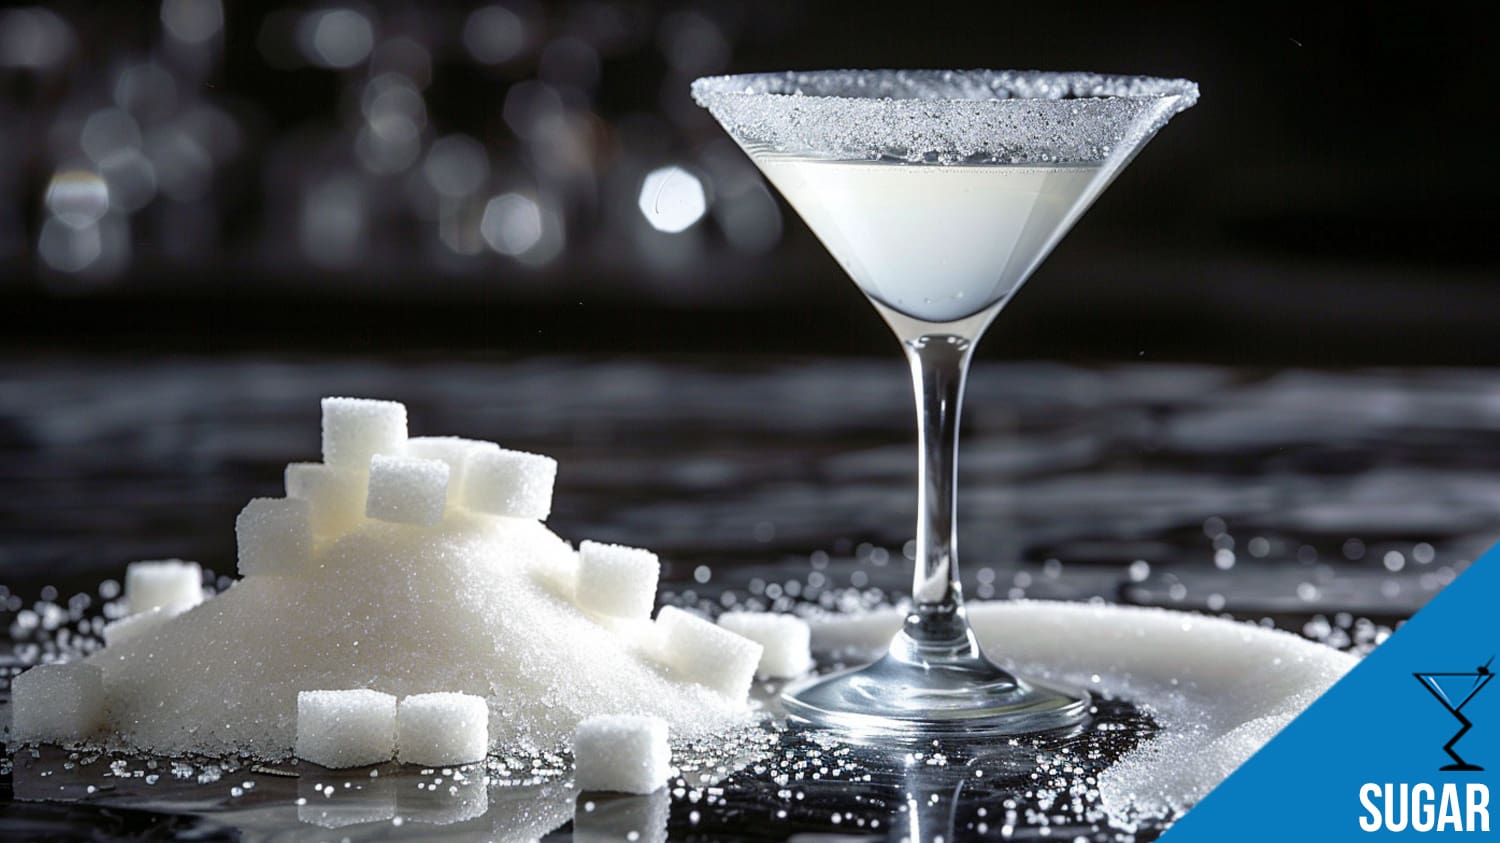 Best Sugar Cocktails: Recipes, Flavors, and Top Brands